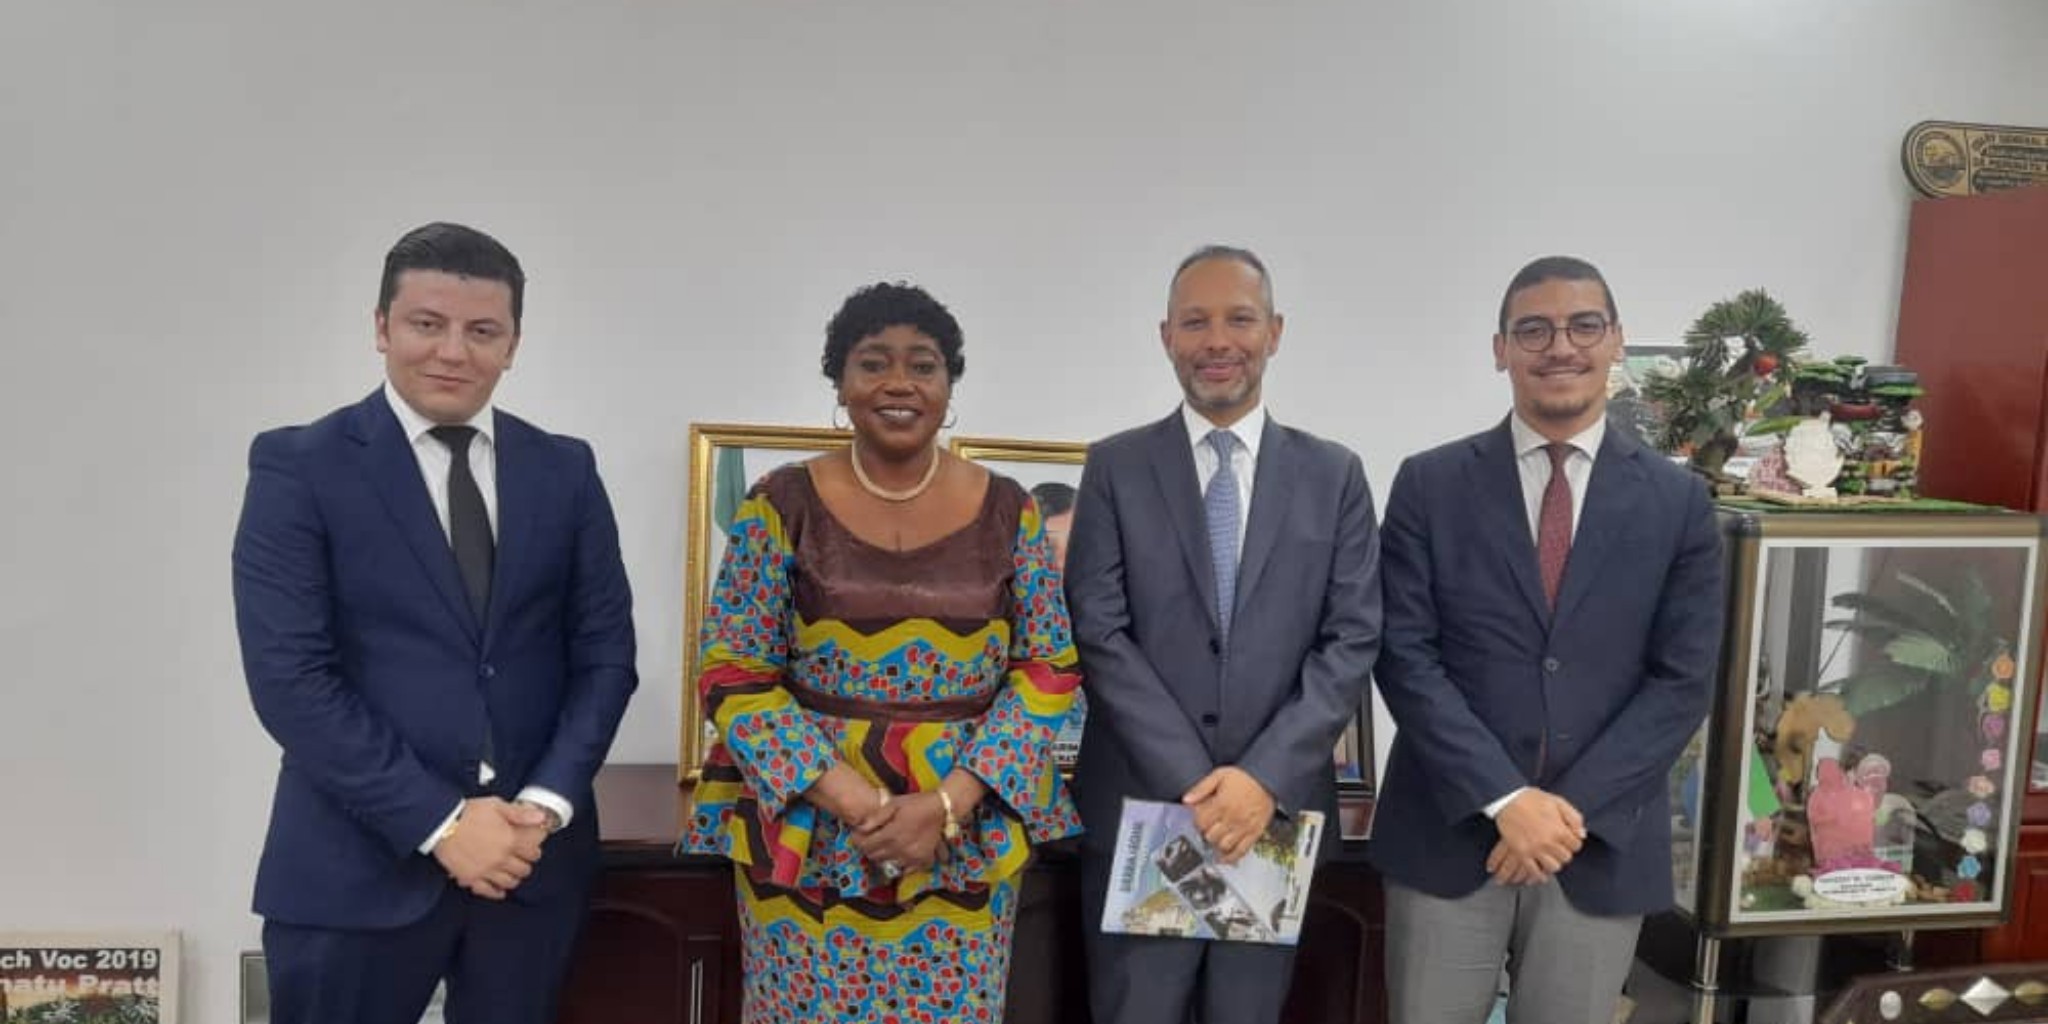 Moroccan Ambassador Meets Sierra Leone Tourism Minister, Commends Her For Having The Most Exciting Job in Government